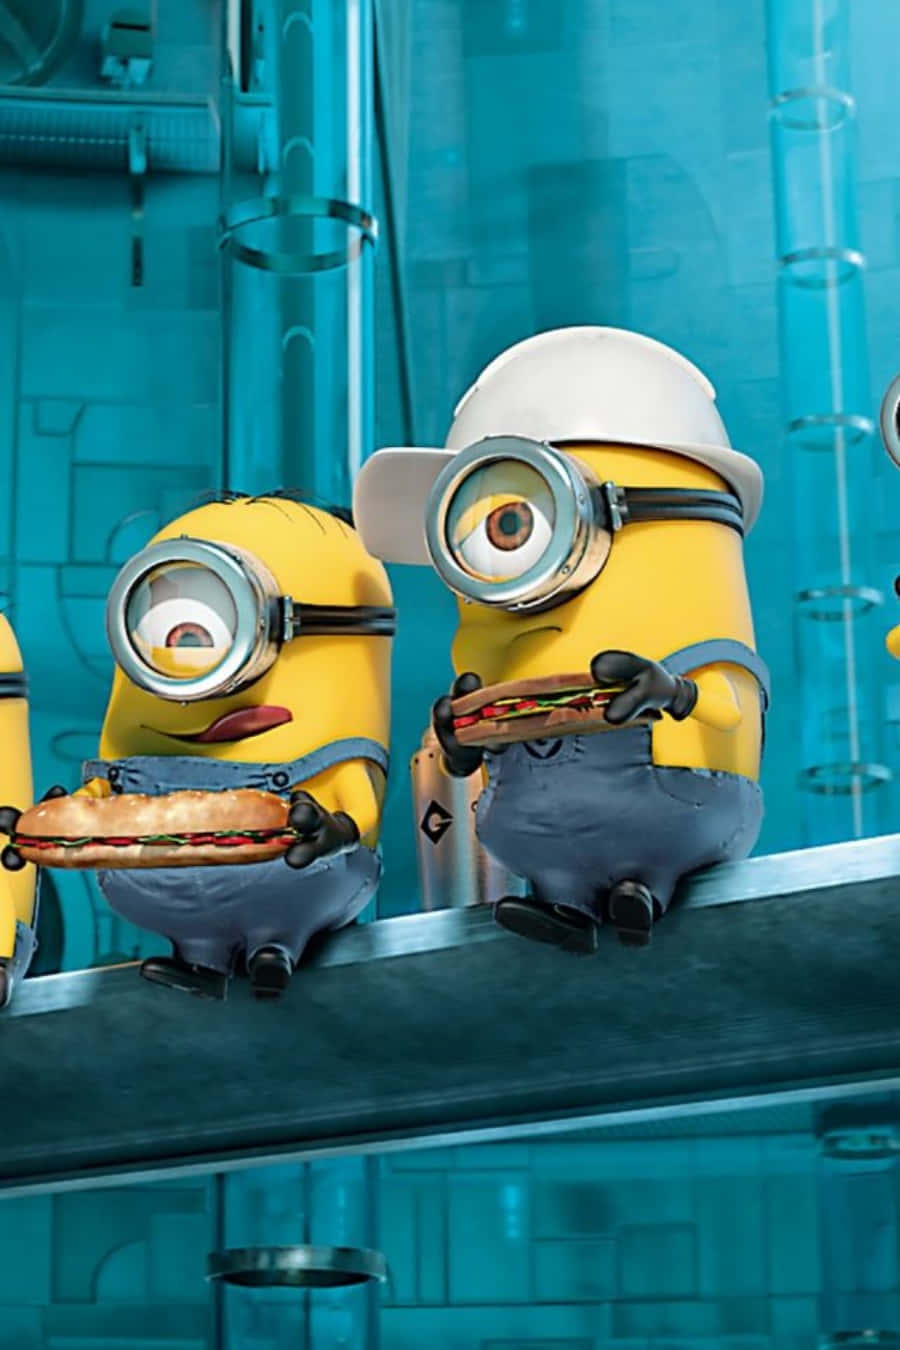 Eating Sandwitch Despicable Me Minion Iphone Wallpaper